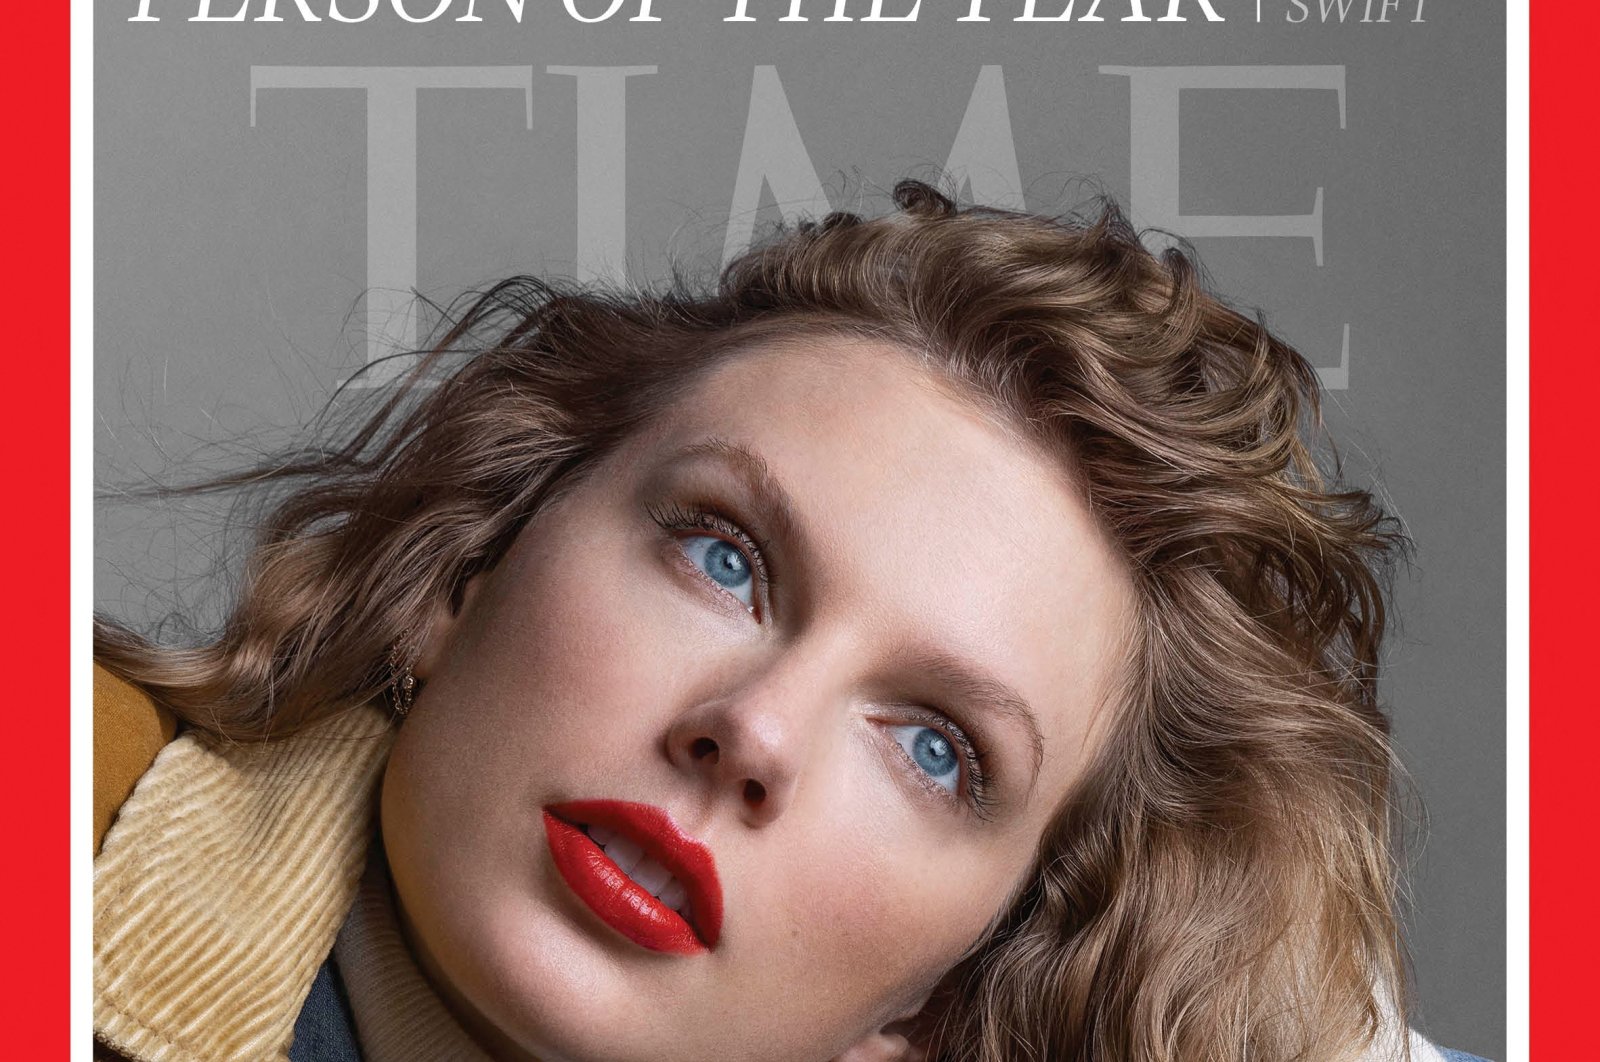 Time magazine names US singer Taylor Swift as person of year